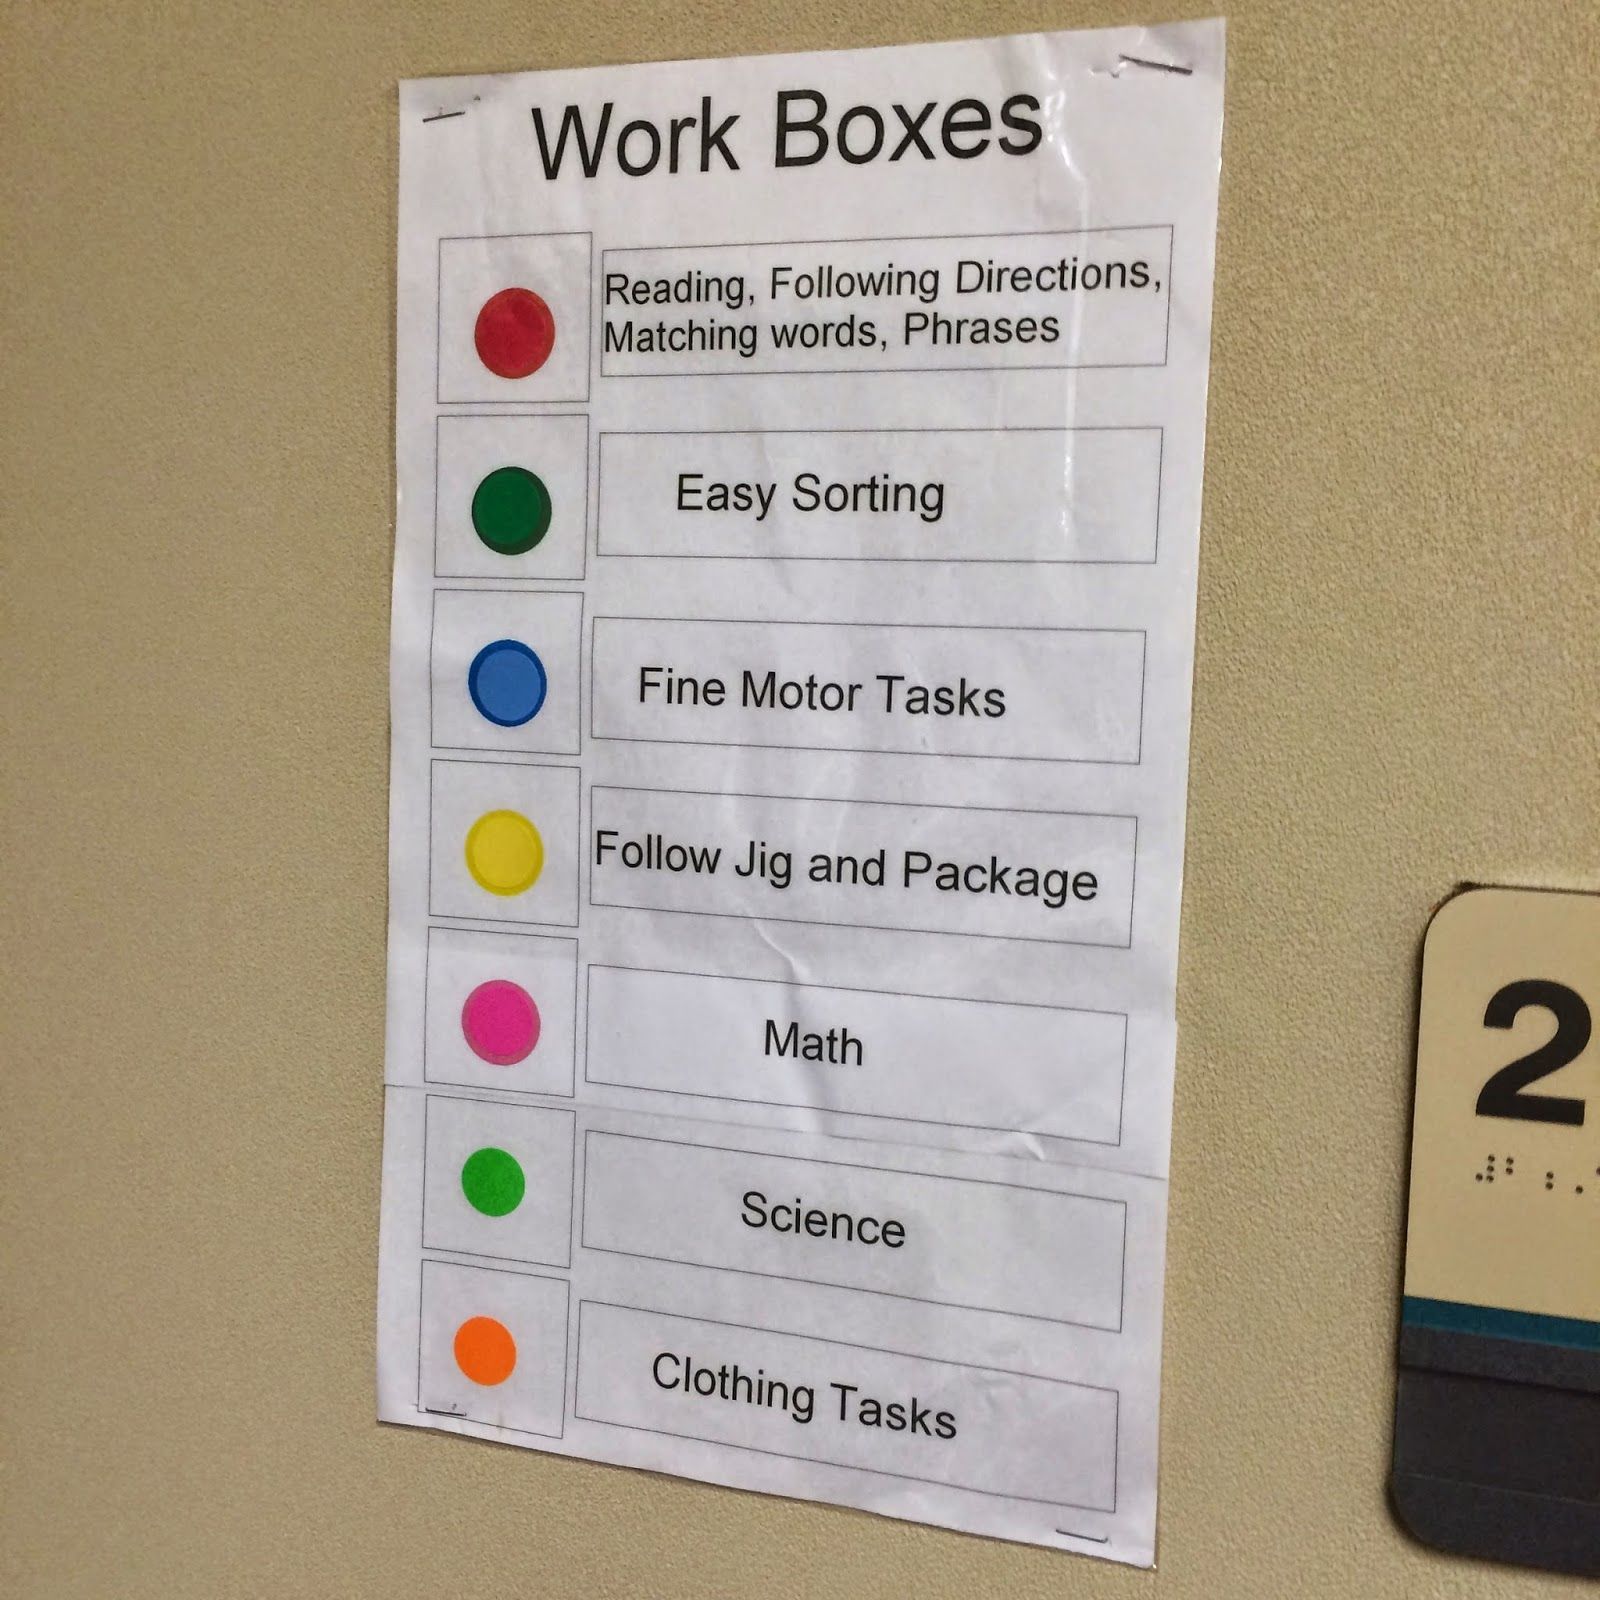 Awesome way to organize and group task boxes – easy to identify at a glance (once you memorize the colors).  Can also help make